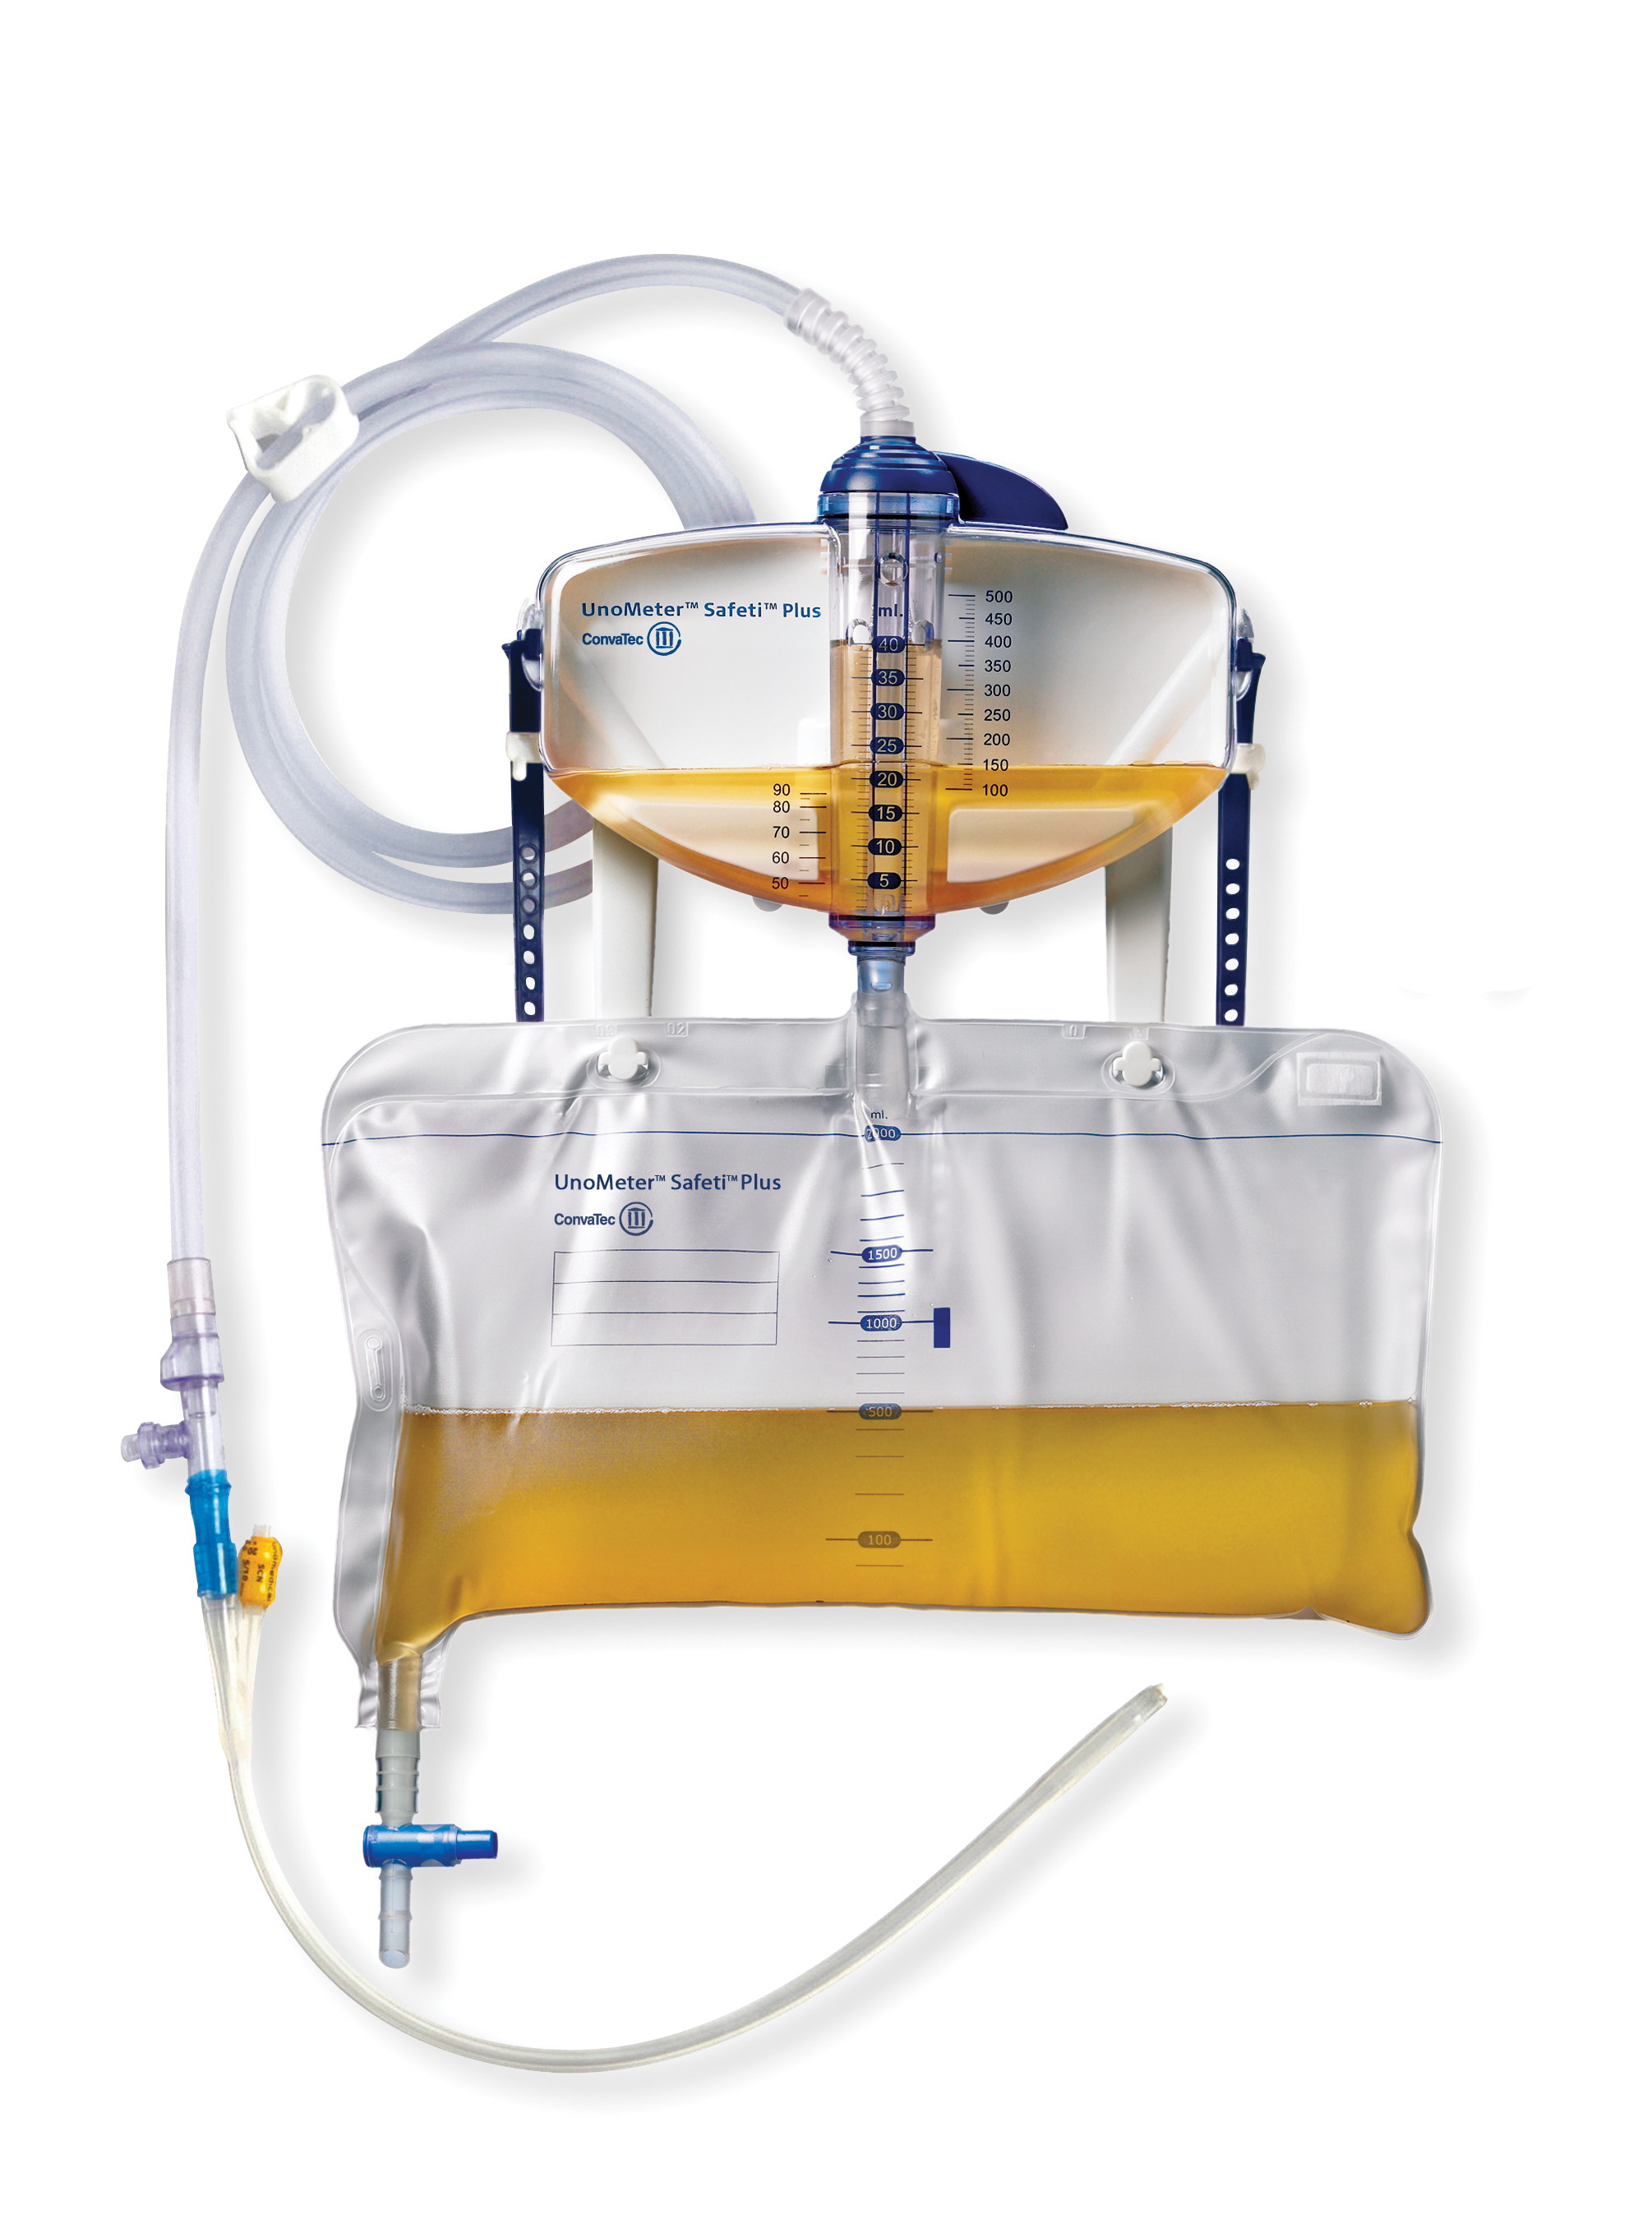 UnoMeter&trade; Safeti&trade; Plus, urine meter kit with pre-connected Silicone Foley catheter and insertion supplies